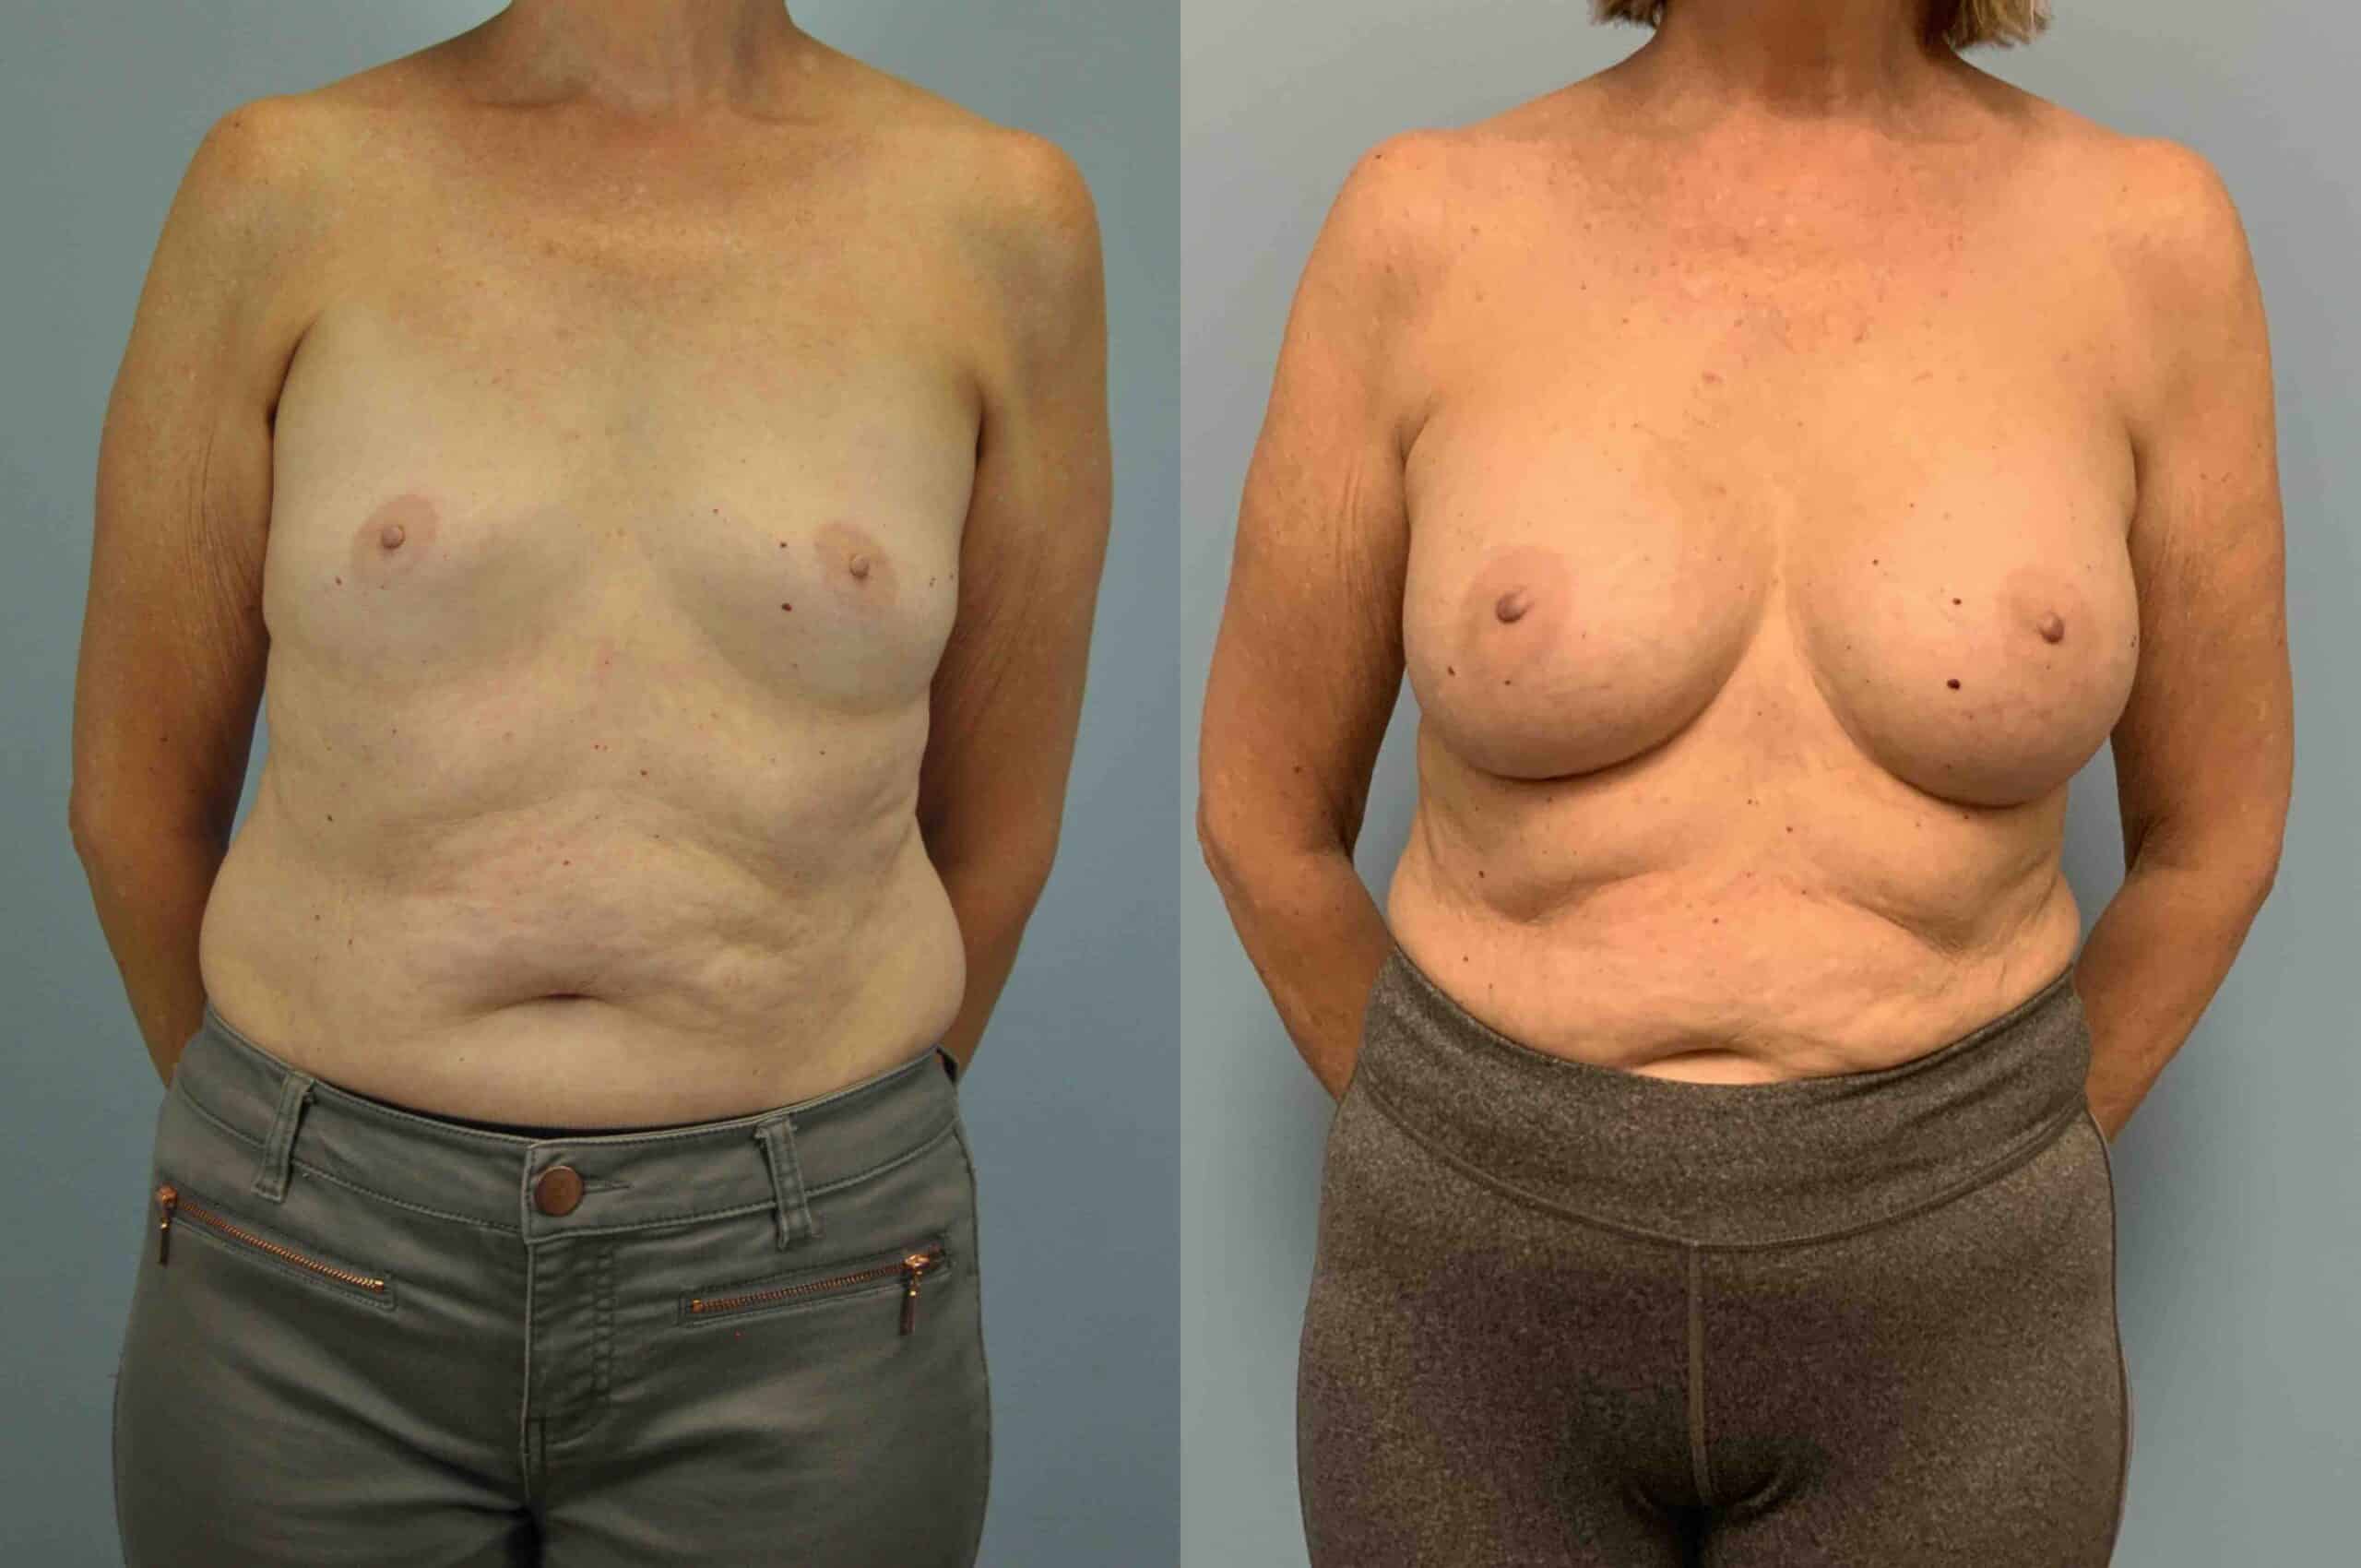 Before and after, patient 3 yr post op from Breast Augmentation and Level III Muscle Release procedures performed by Dr. Paul Vanek